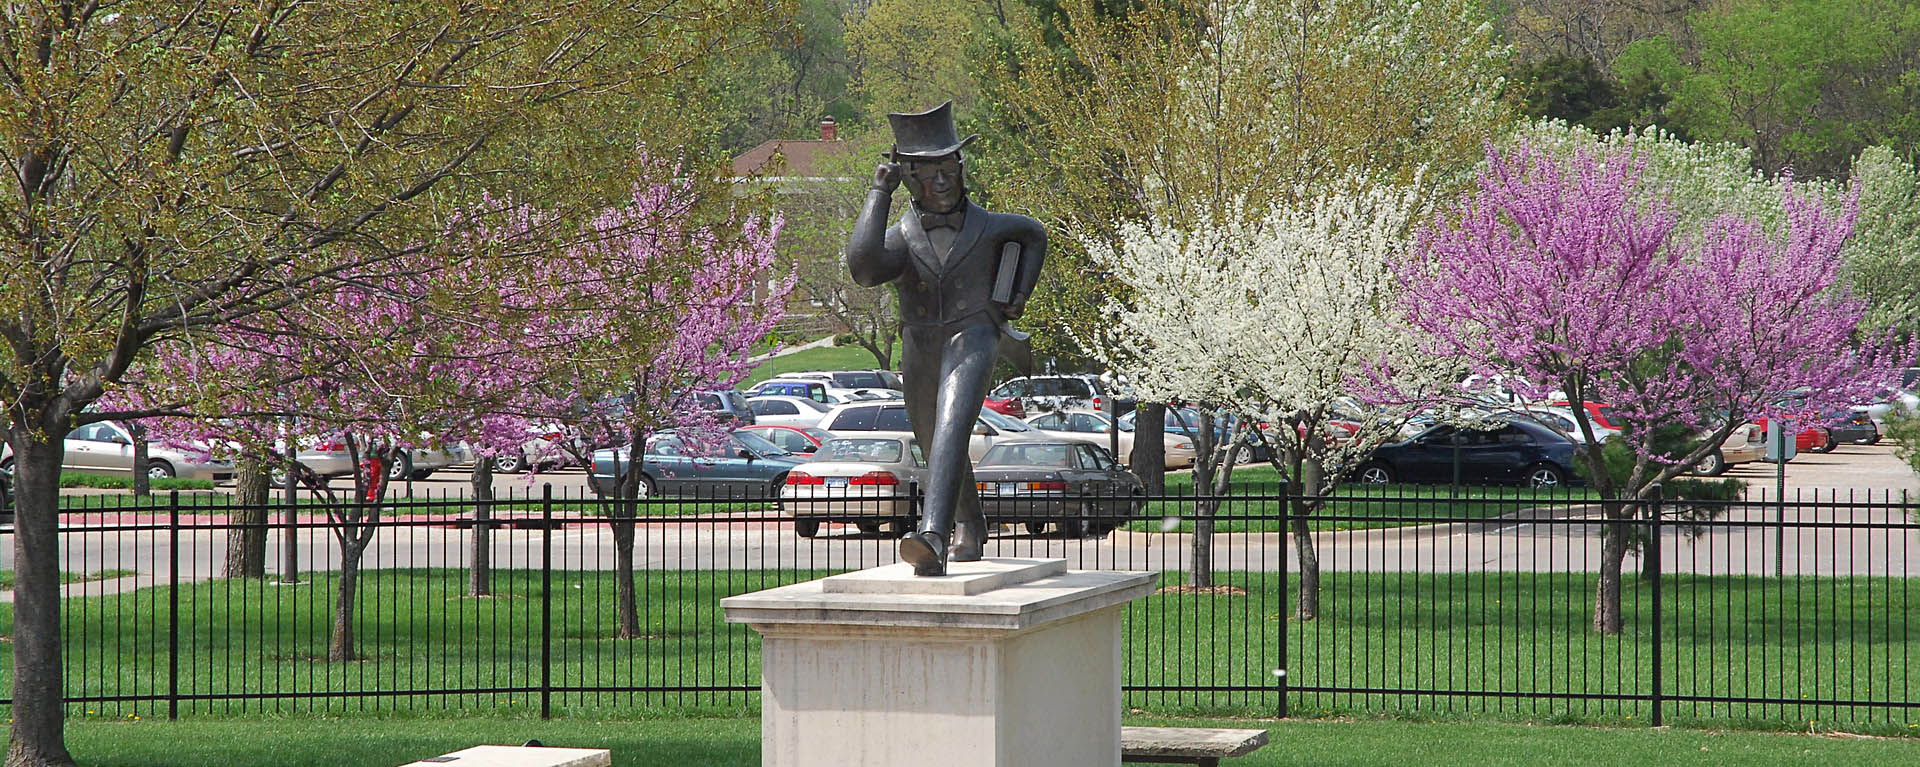 Ichabod statue on campus with spring trees